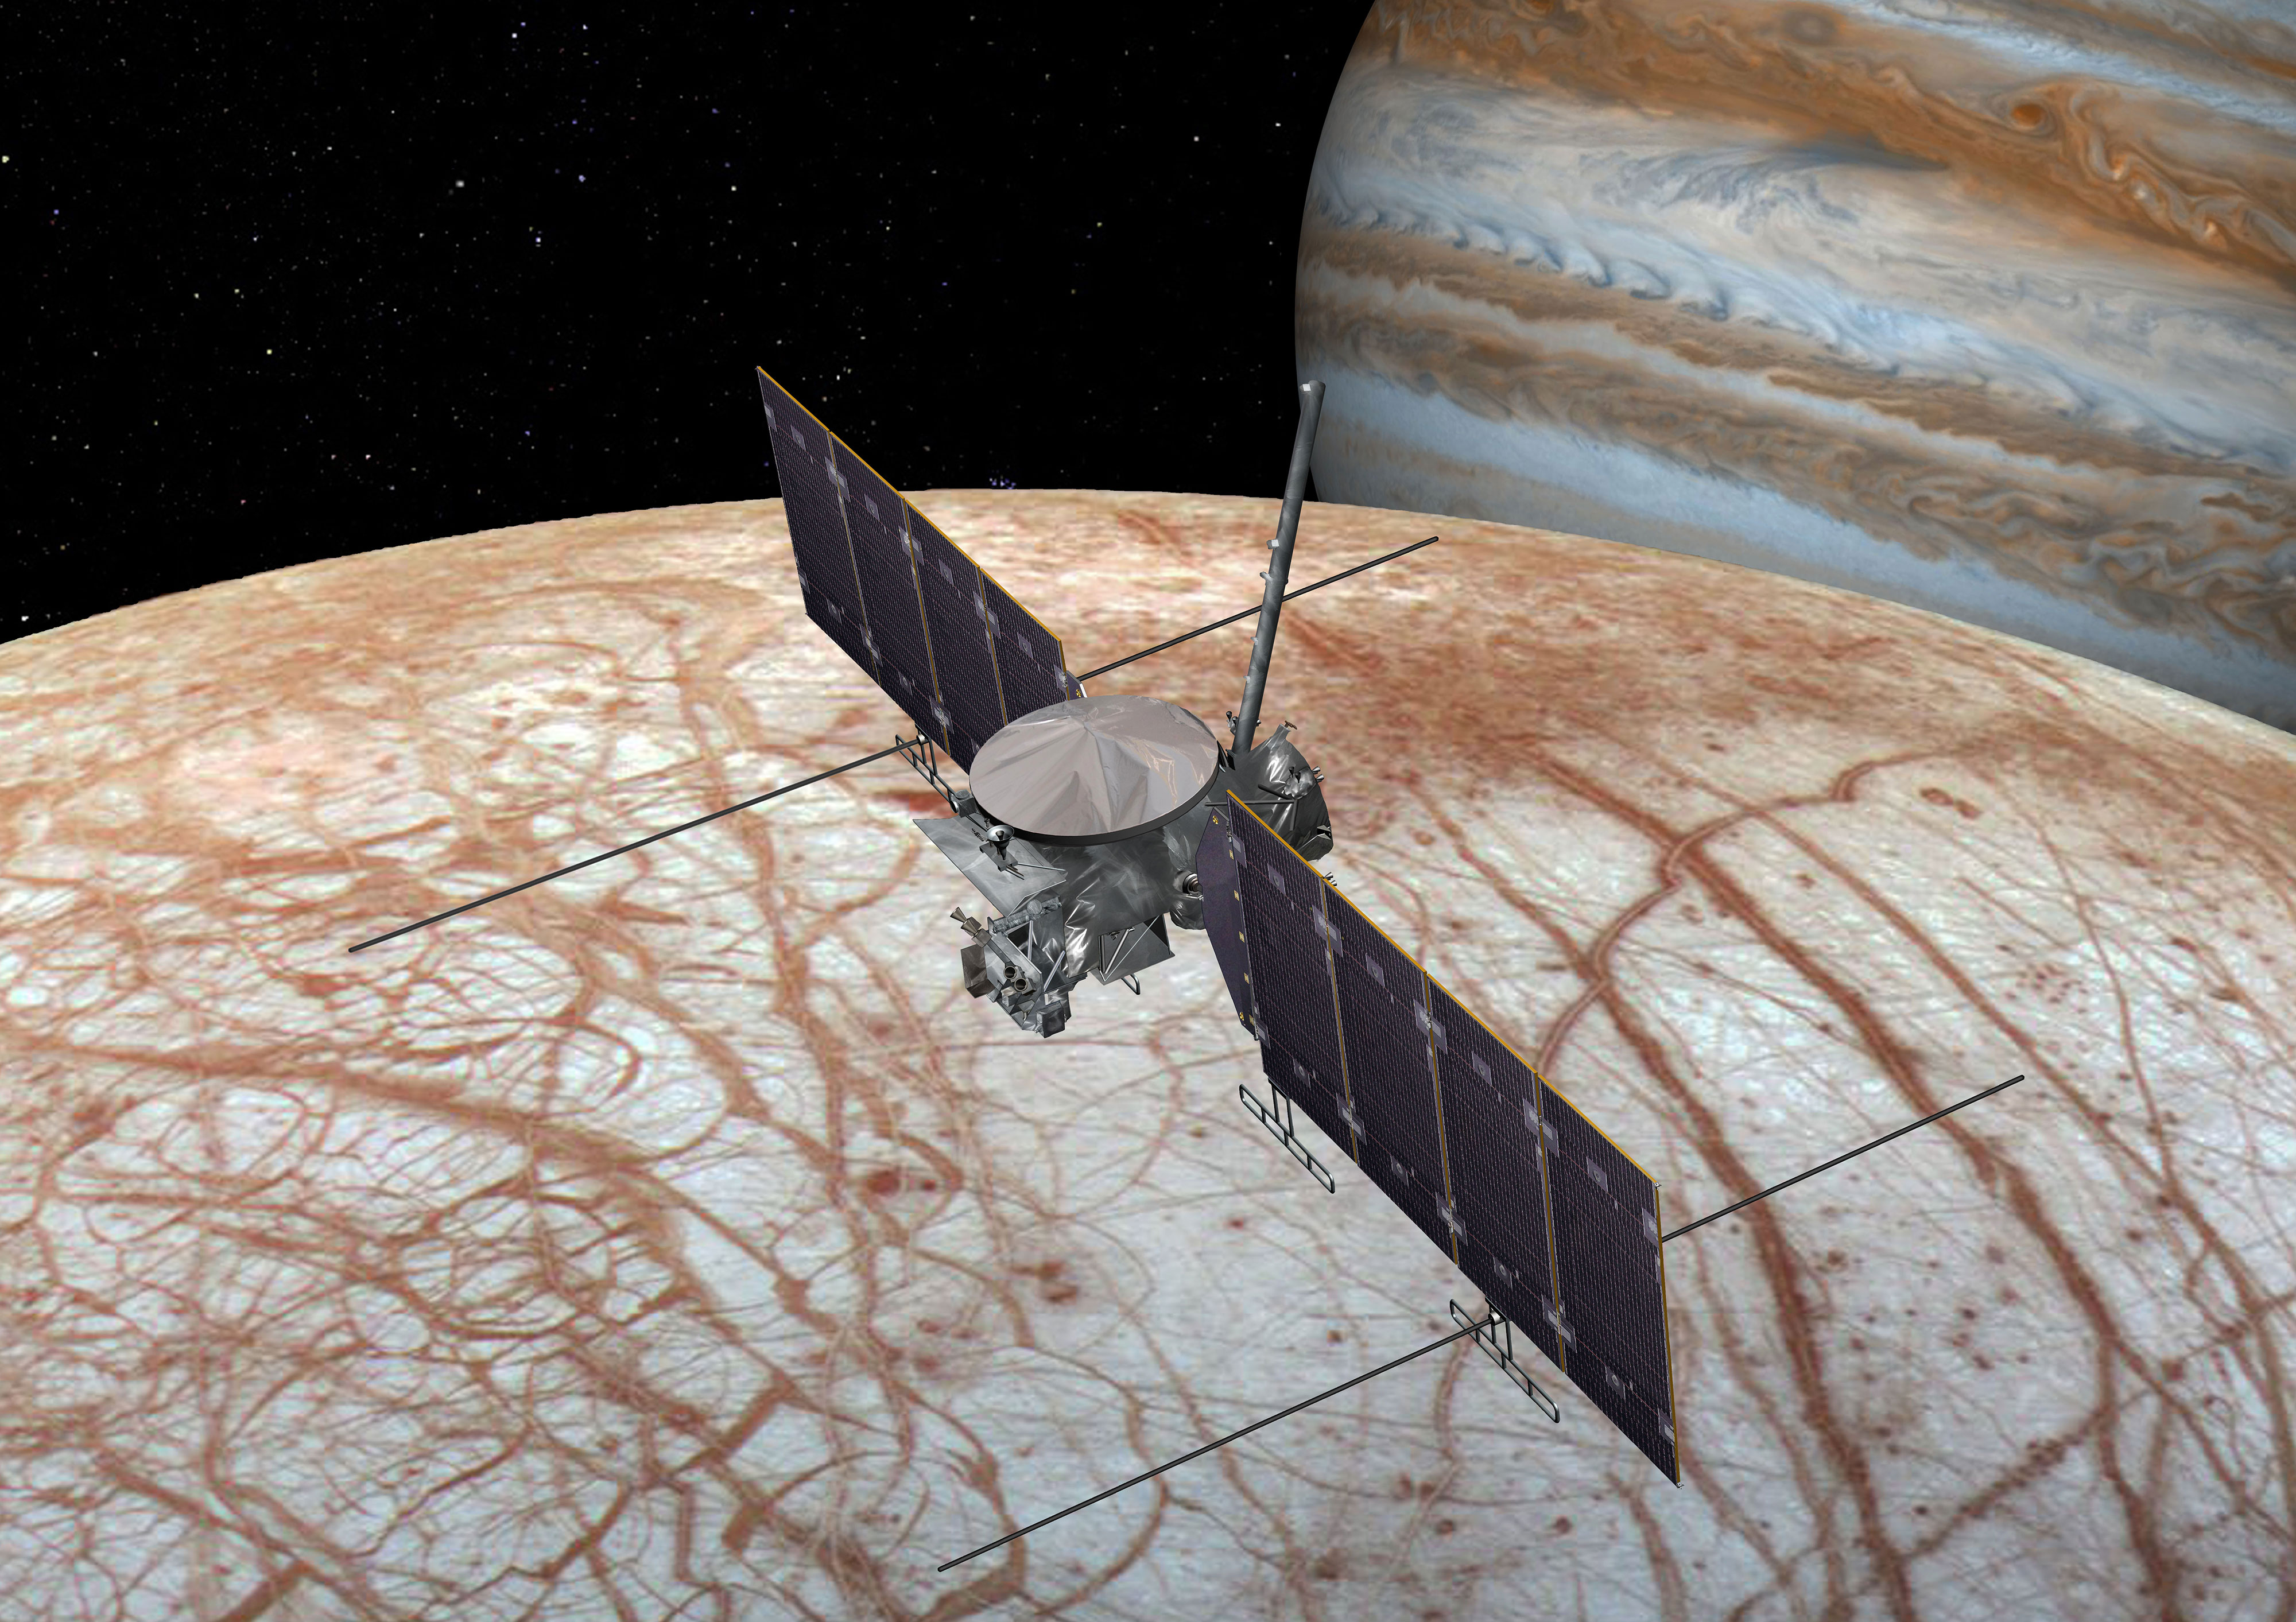 This artist’s rendering shows NASA’s Europa mission spacecraft, which is being developed for a launch sometime in the 2020s. Credit: NASA/JPL-Caltech